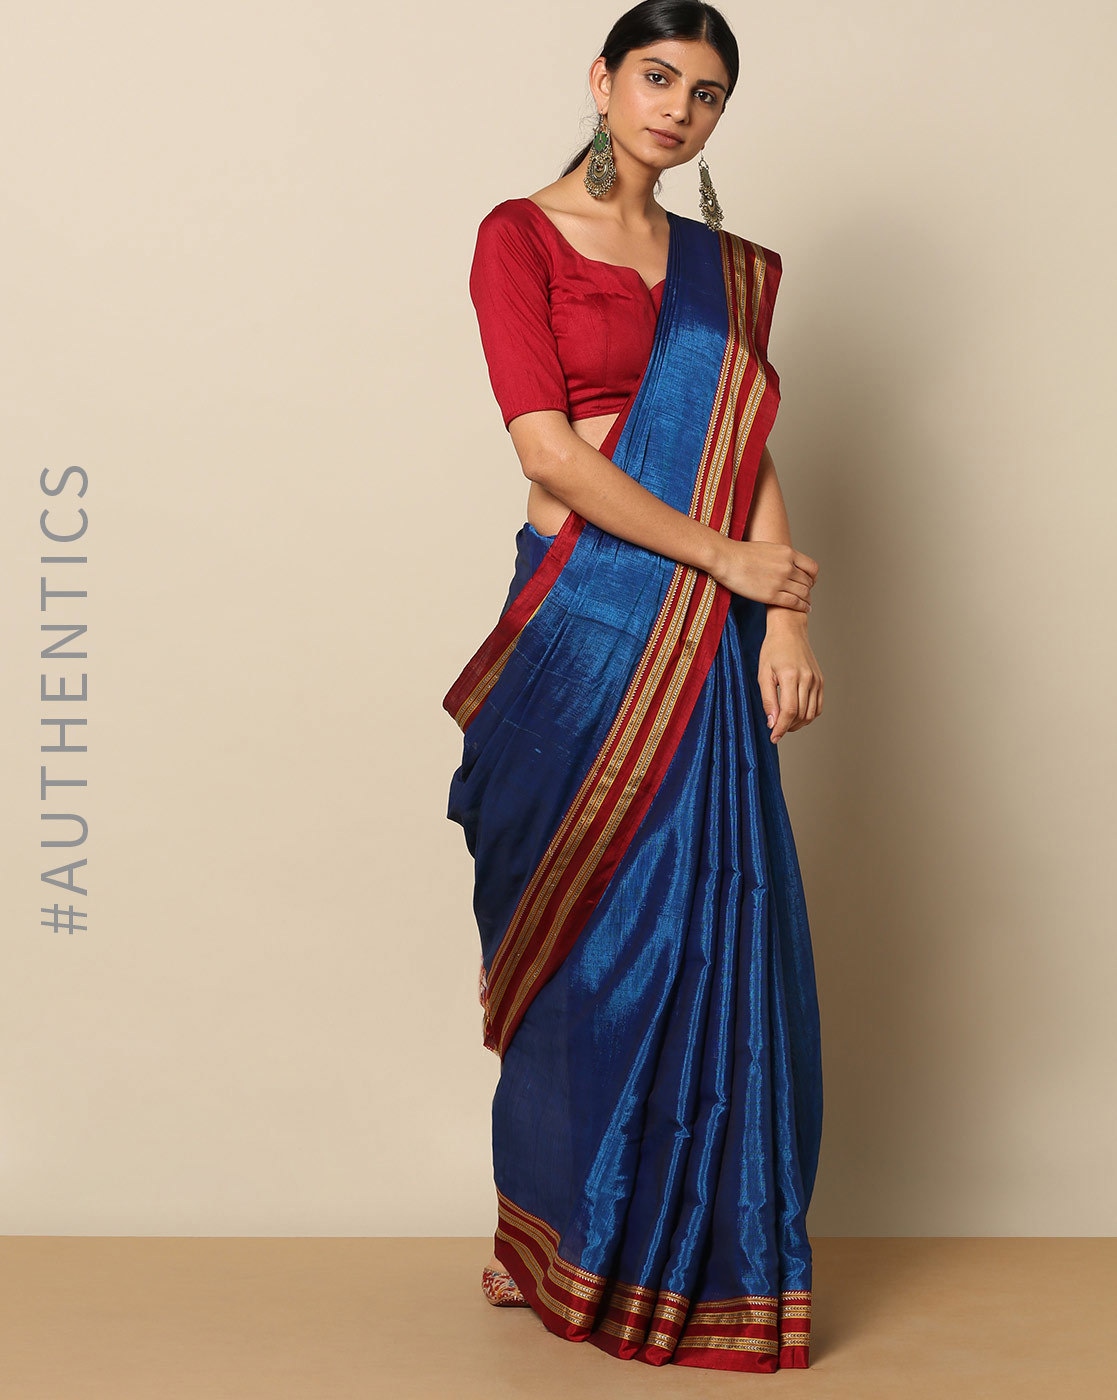 Silkal Sarees - Find Your Perfect Cotton and Silk Saree at Silkal.in